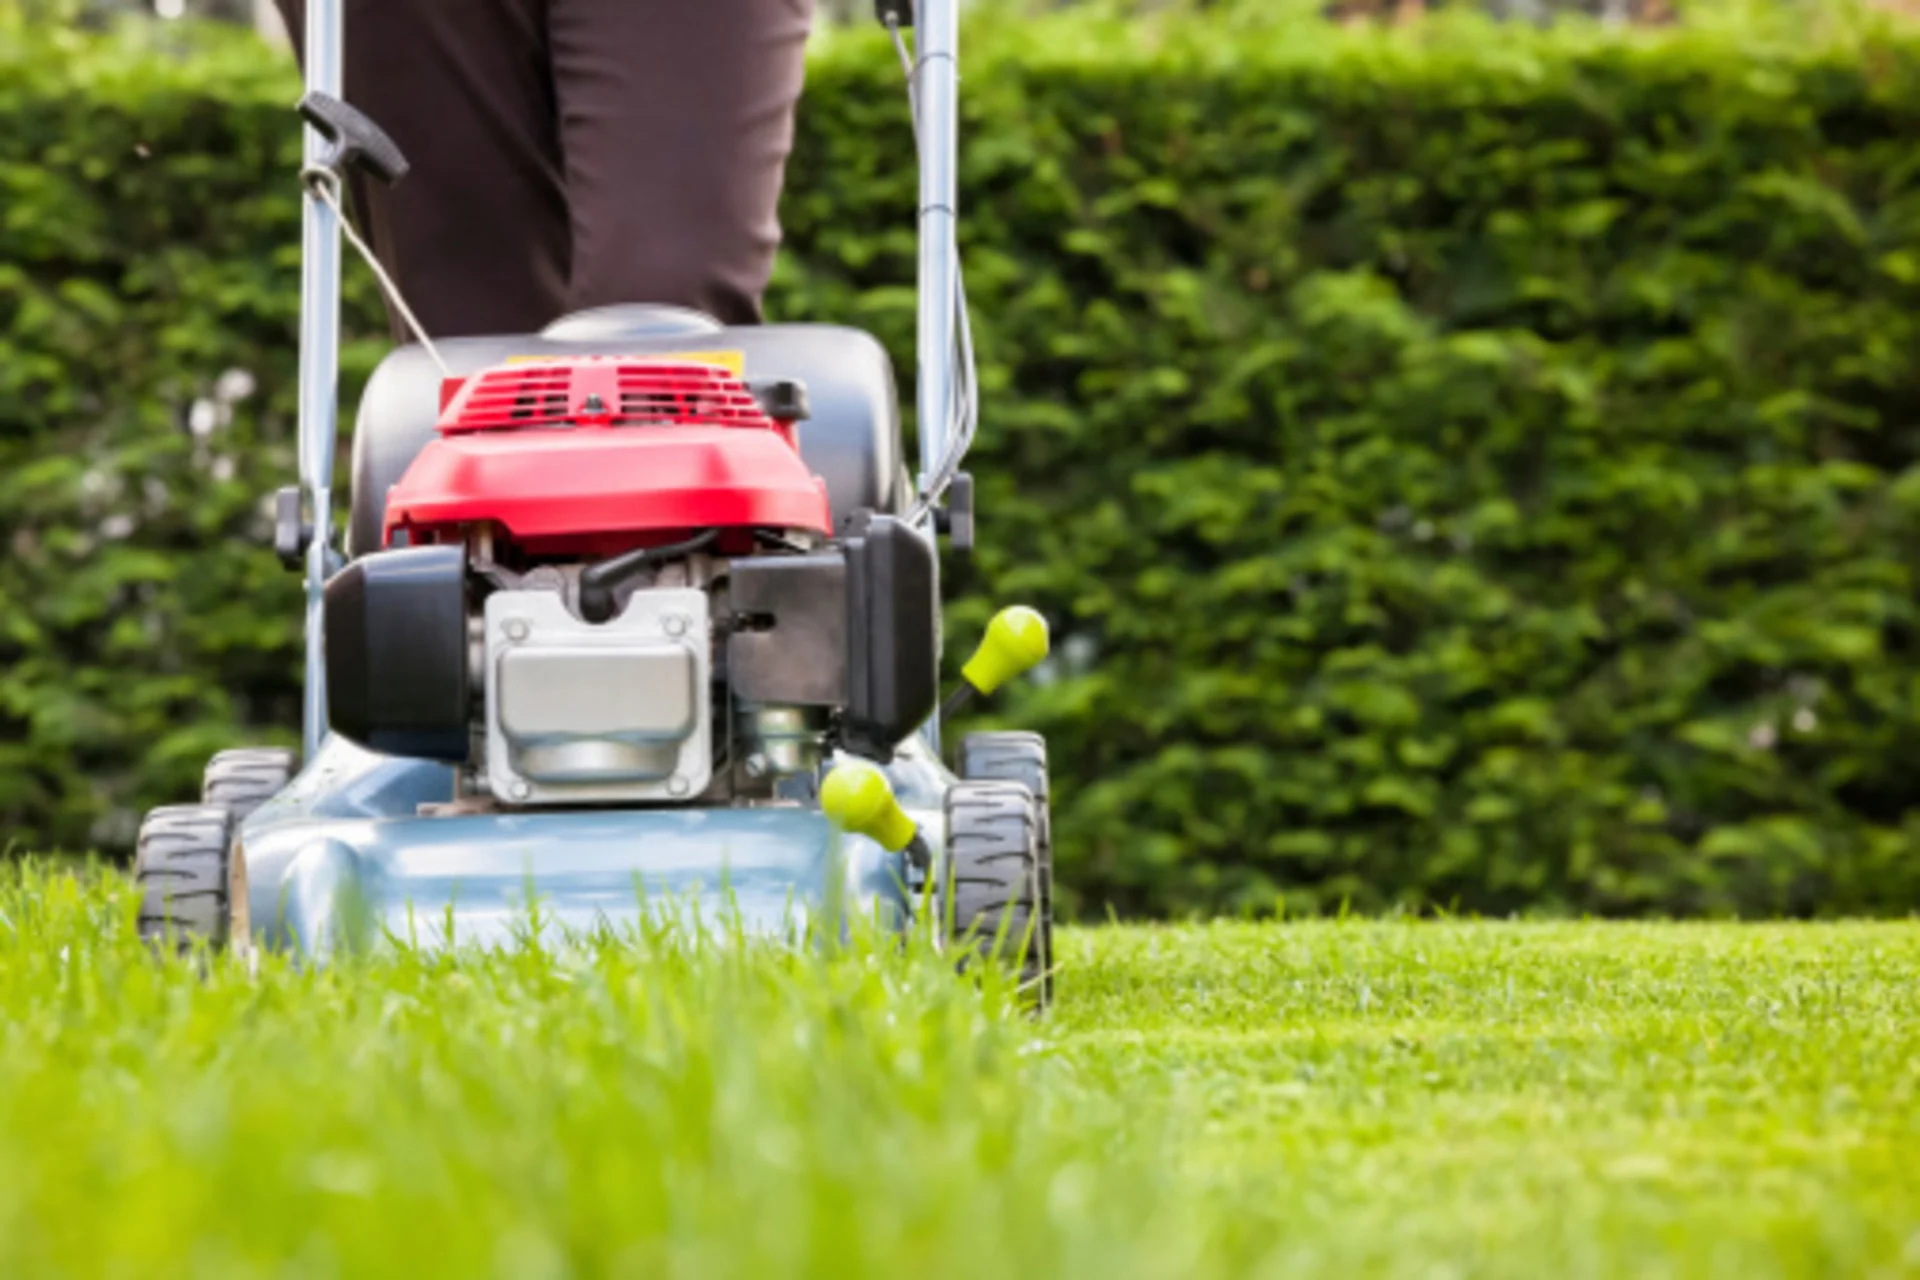 When you should stop mowing the lawn